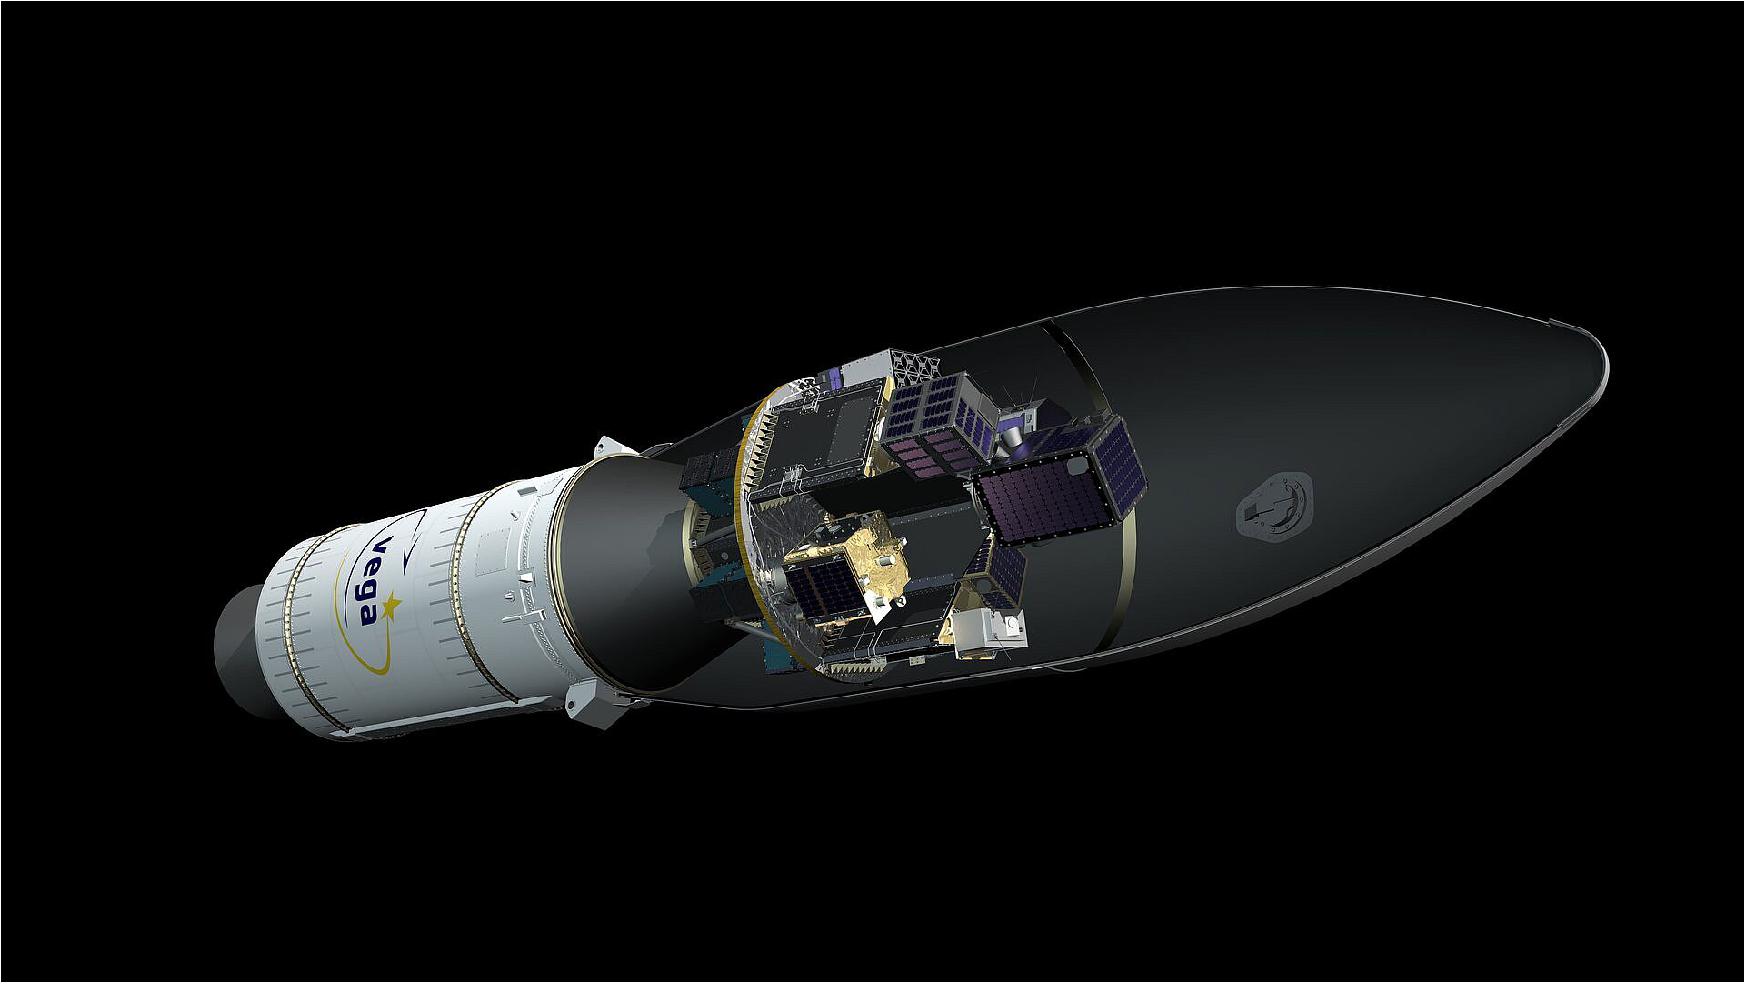 Figure 14: Artist's view of Vega VV16 with the Small Spacecraft Mission Service (SSMS) dispenser and SAT-AIS. Visible are the Zefiro-9 upper stage, the Attitude Vernier Upper Module (AVUM) and the SSMS dispenser with its payload of satellites (image credit: ESA, J. Huart)